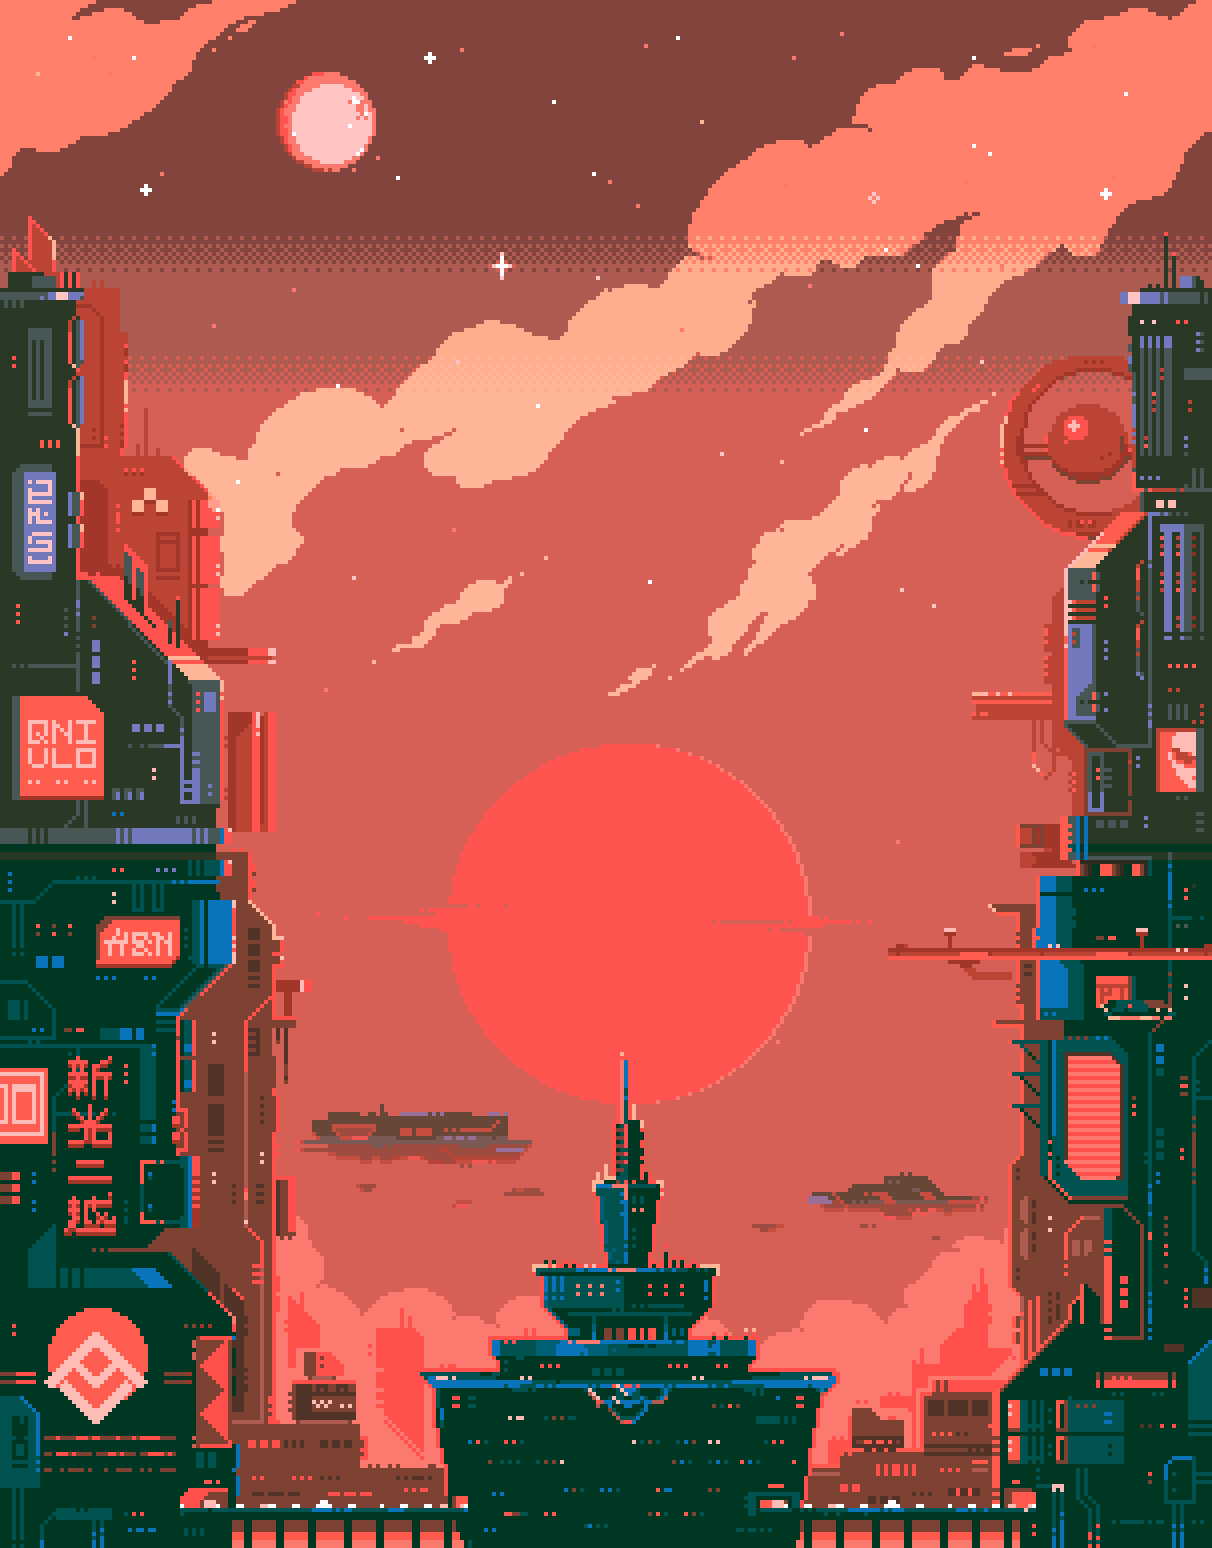 A city with buildings and the sun setting - Pixel art